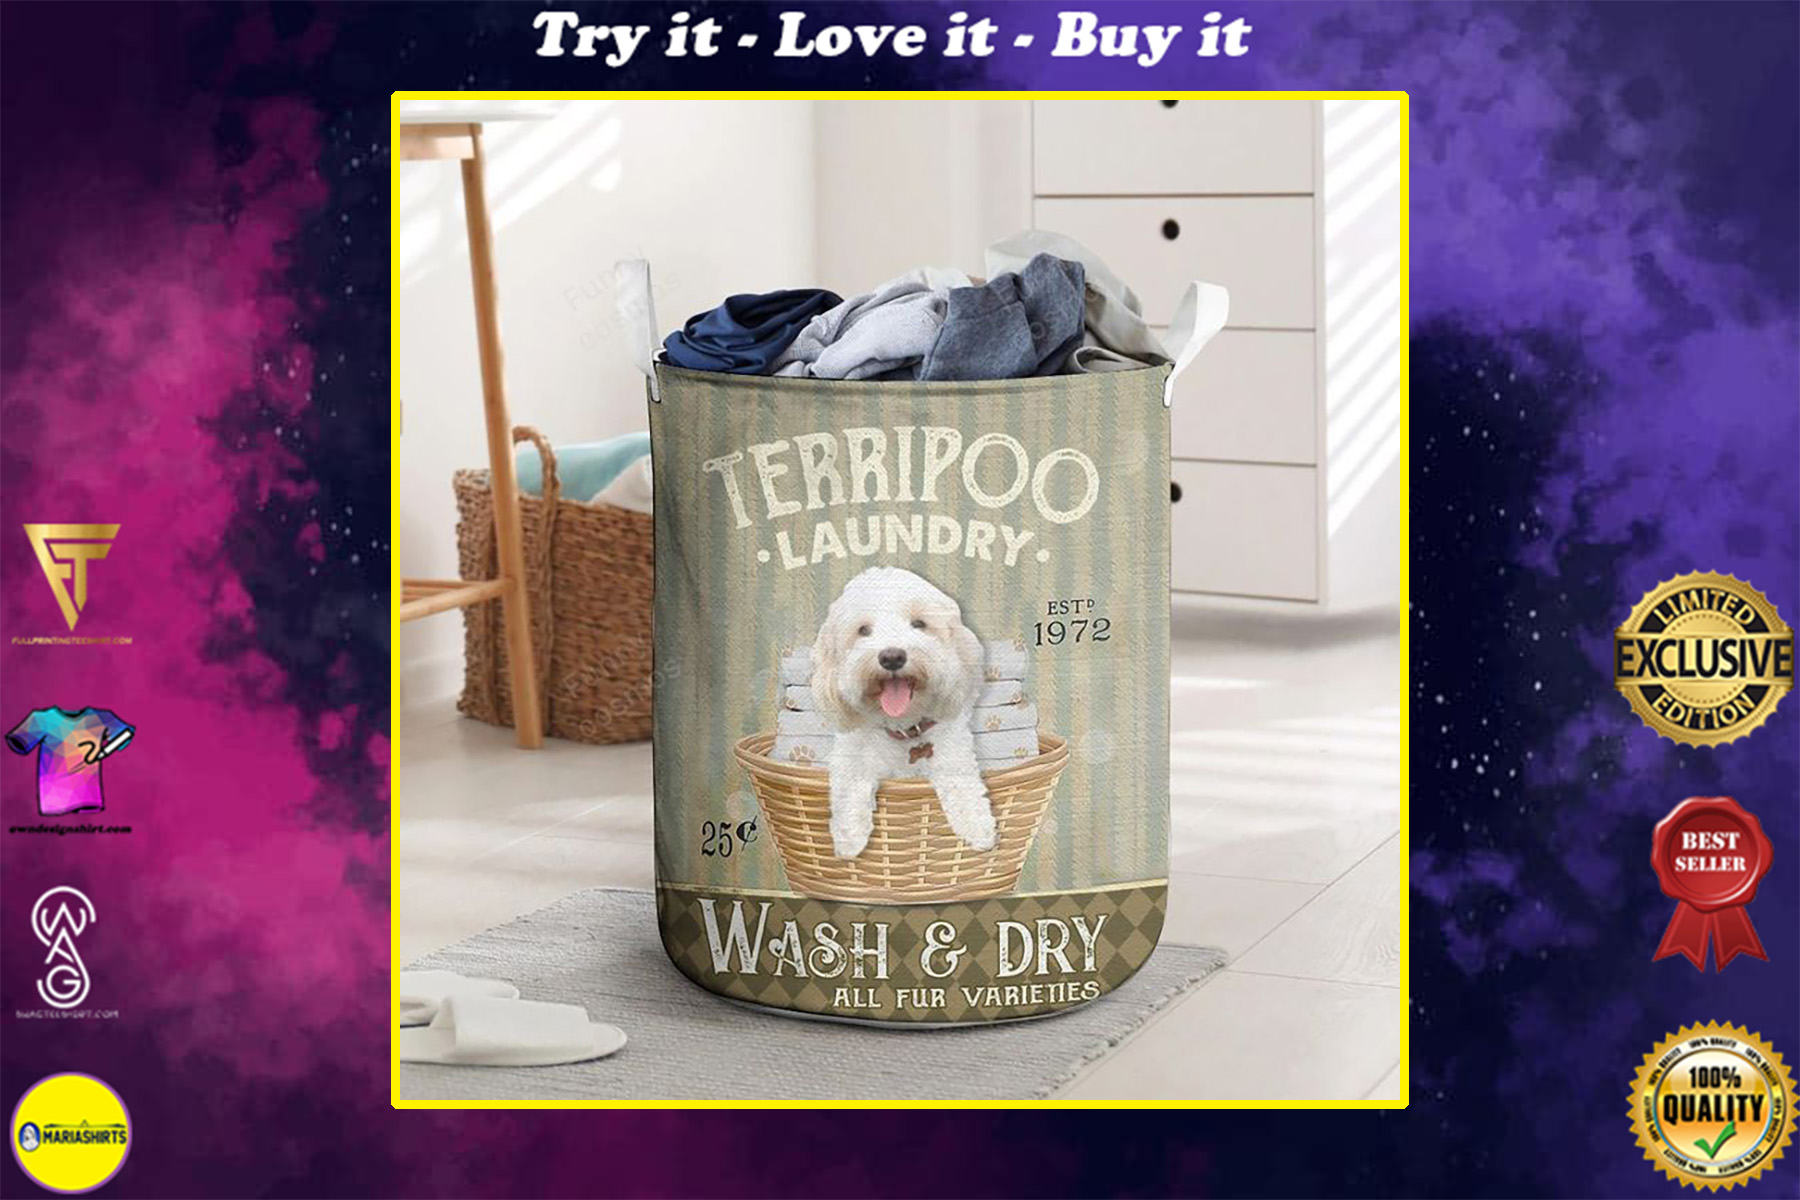 terri poo wash and dry all over printed laundry basket